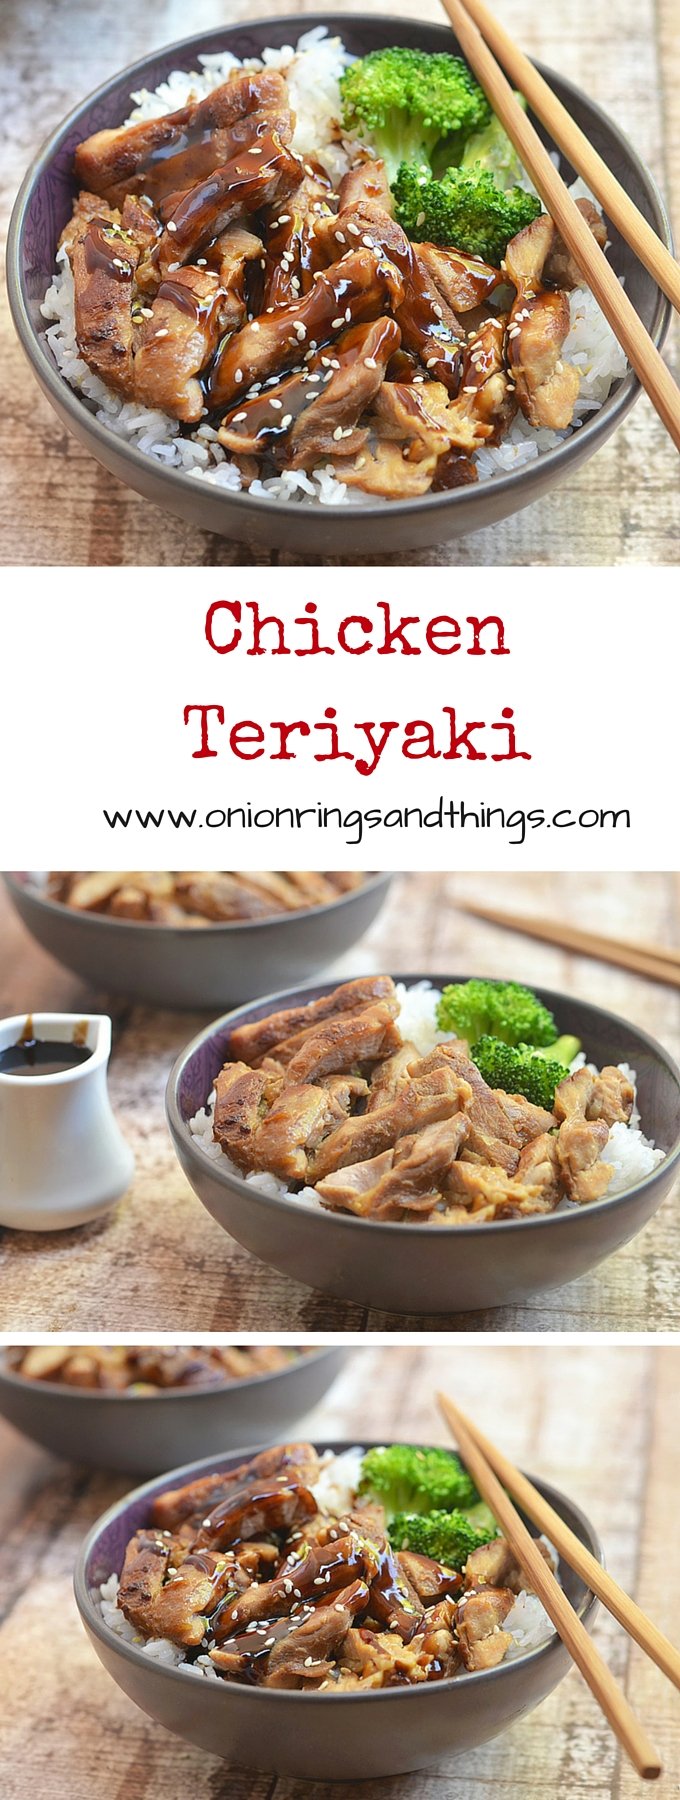 With moist meat, full flavor and from-scratch teriyaki sauce, this chicken teriyaki is a breeze to make and sure to be a family favorite.